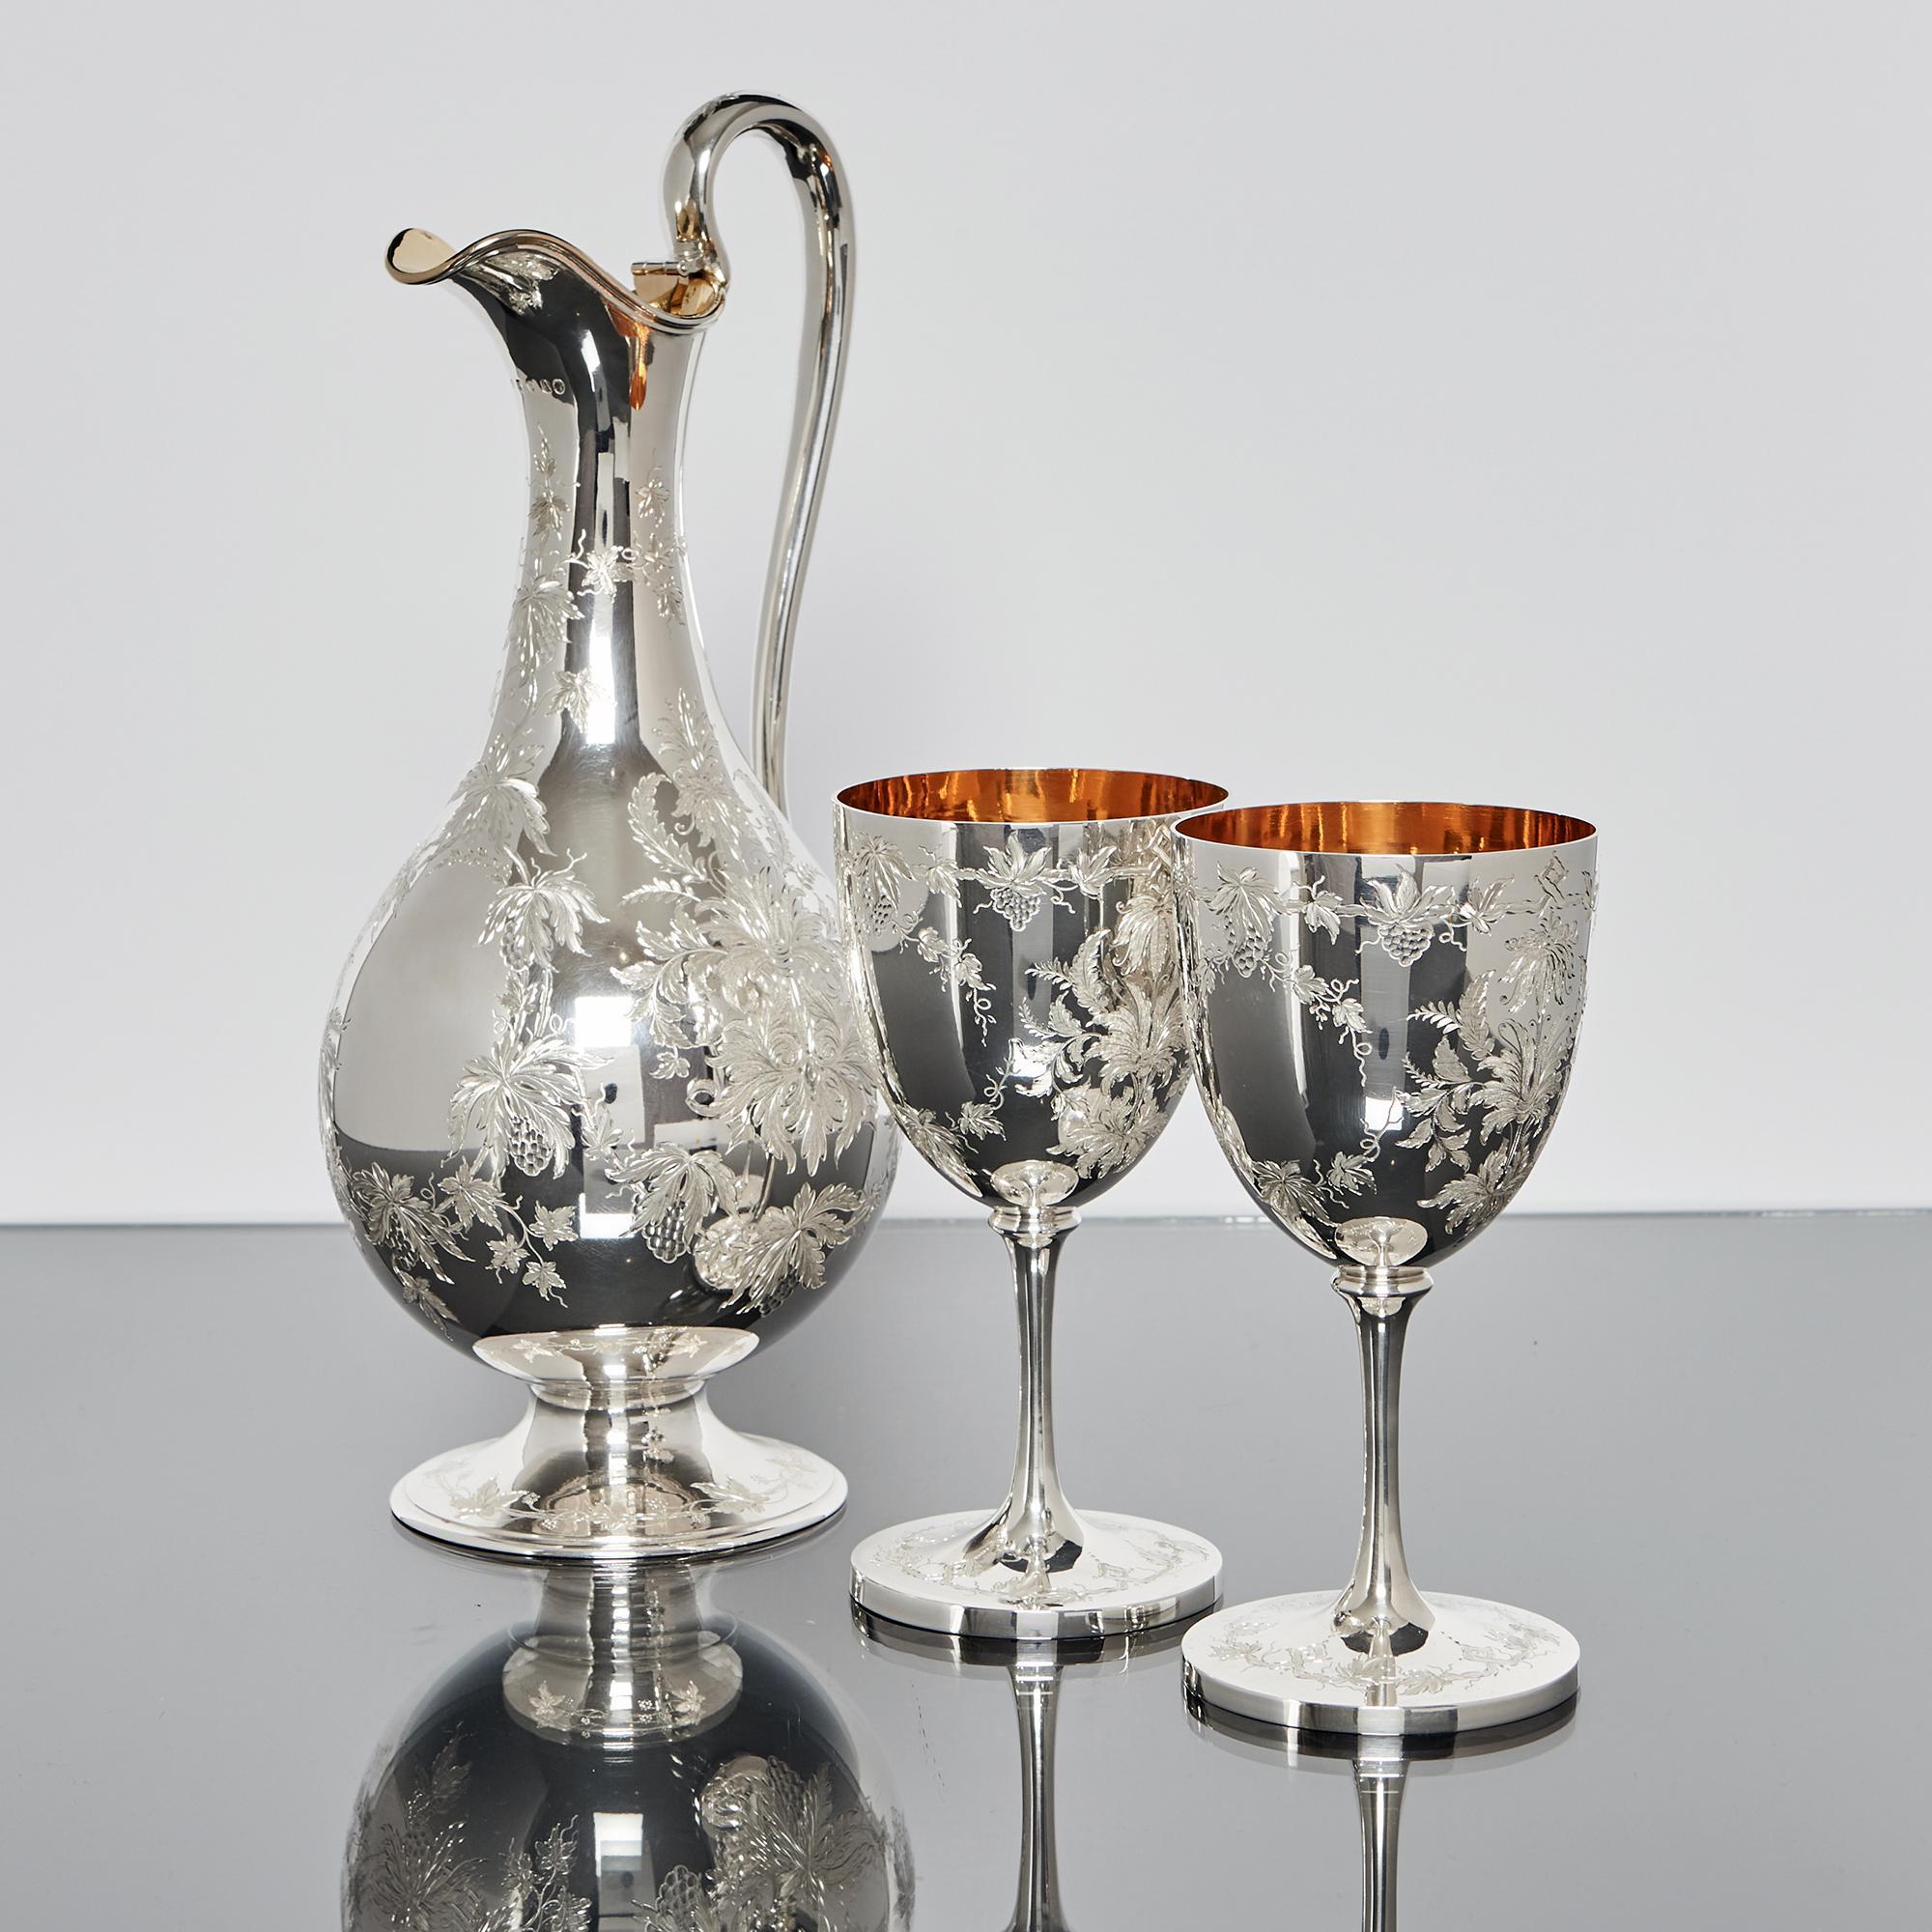 Pair of Victorian silver wine goblets and matching silver wine jug, housed in their original blue velvet-lined oak case. This beautiful and elegant set is hand engraved in fine detail with foliage, grapes and vines while the interiors of the jug and